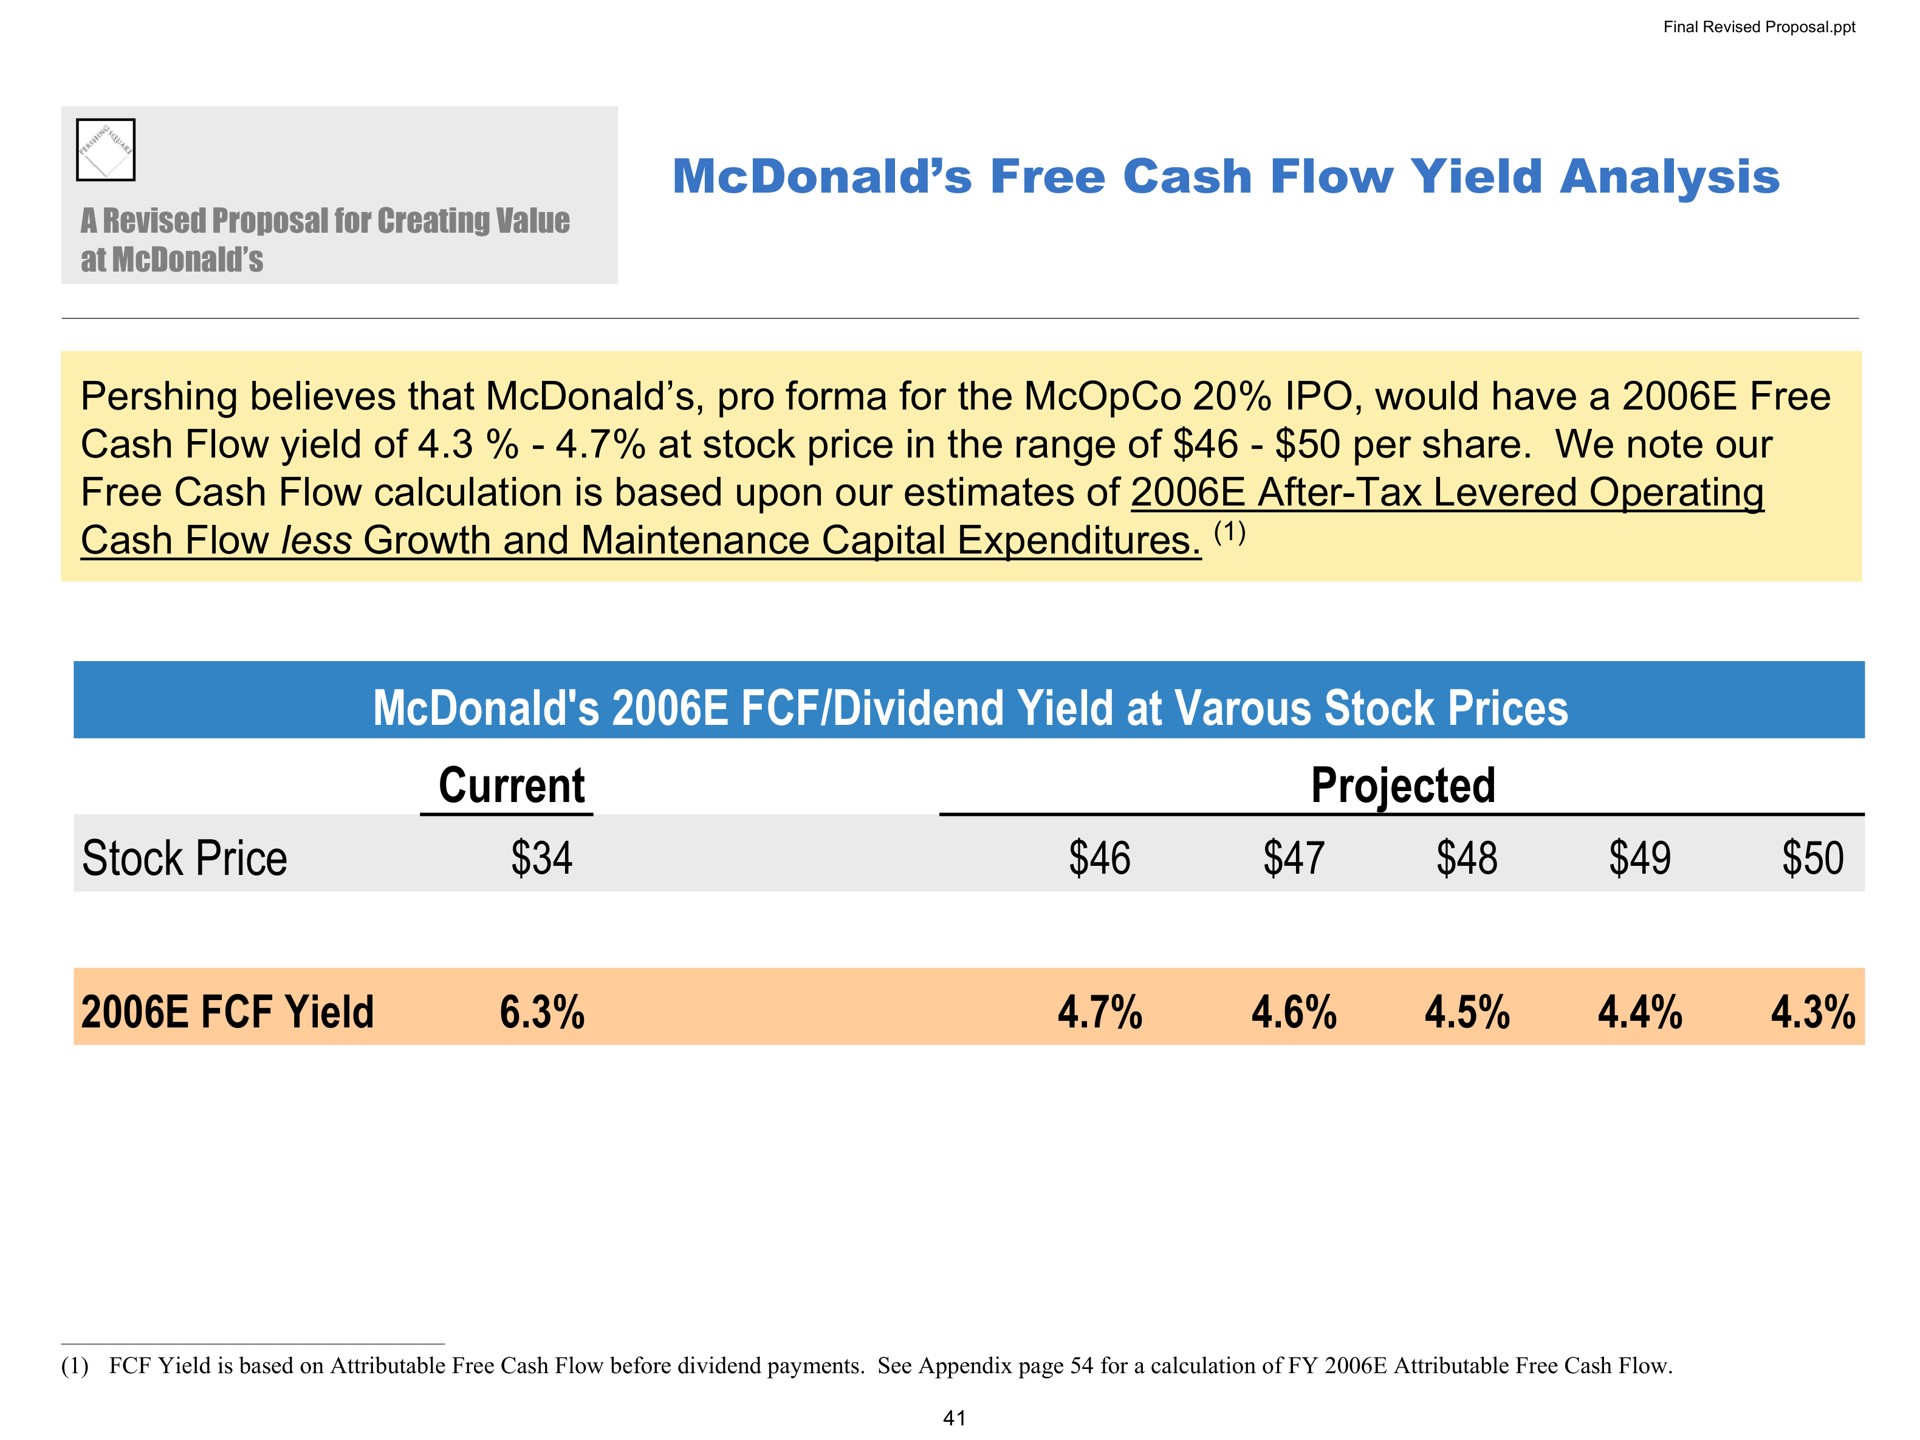 free cash flow yield analysis believes that pro for the would have a free cash flow yield of at stock price in the range of per share we note our free cash flow calculation is based upon our estimates of after tax levered operating cash flow less growth and maintenance capital expenditures dividend yield at stock prices stock price current projected yield ess | Pershing Square